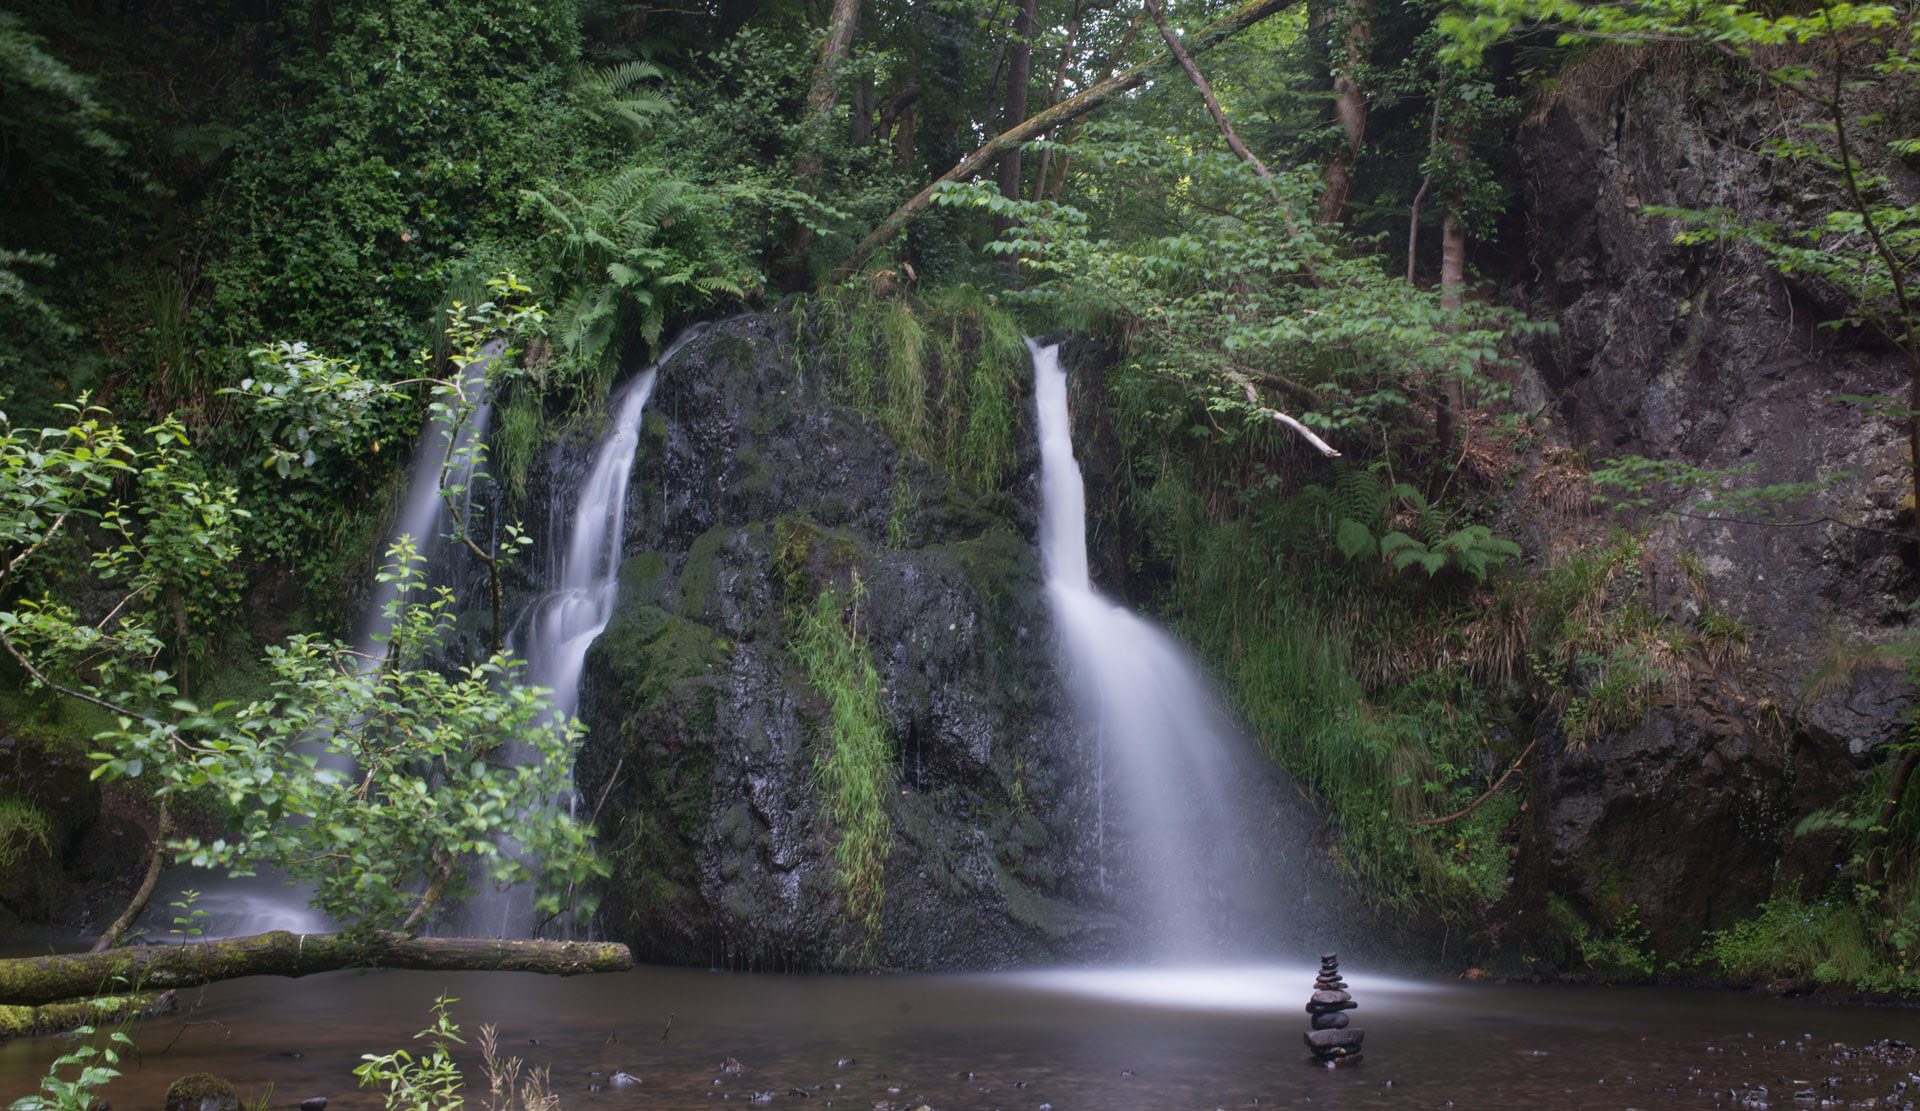 A fairy glen in easter ross. the image depicts a waterfall flowing down into a pool